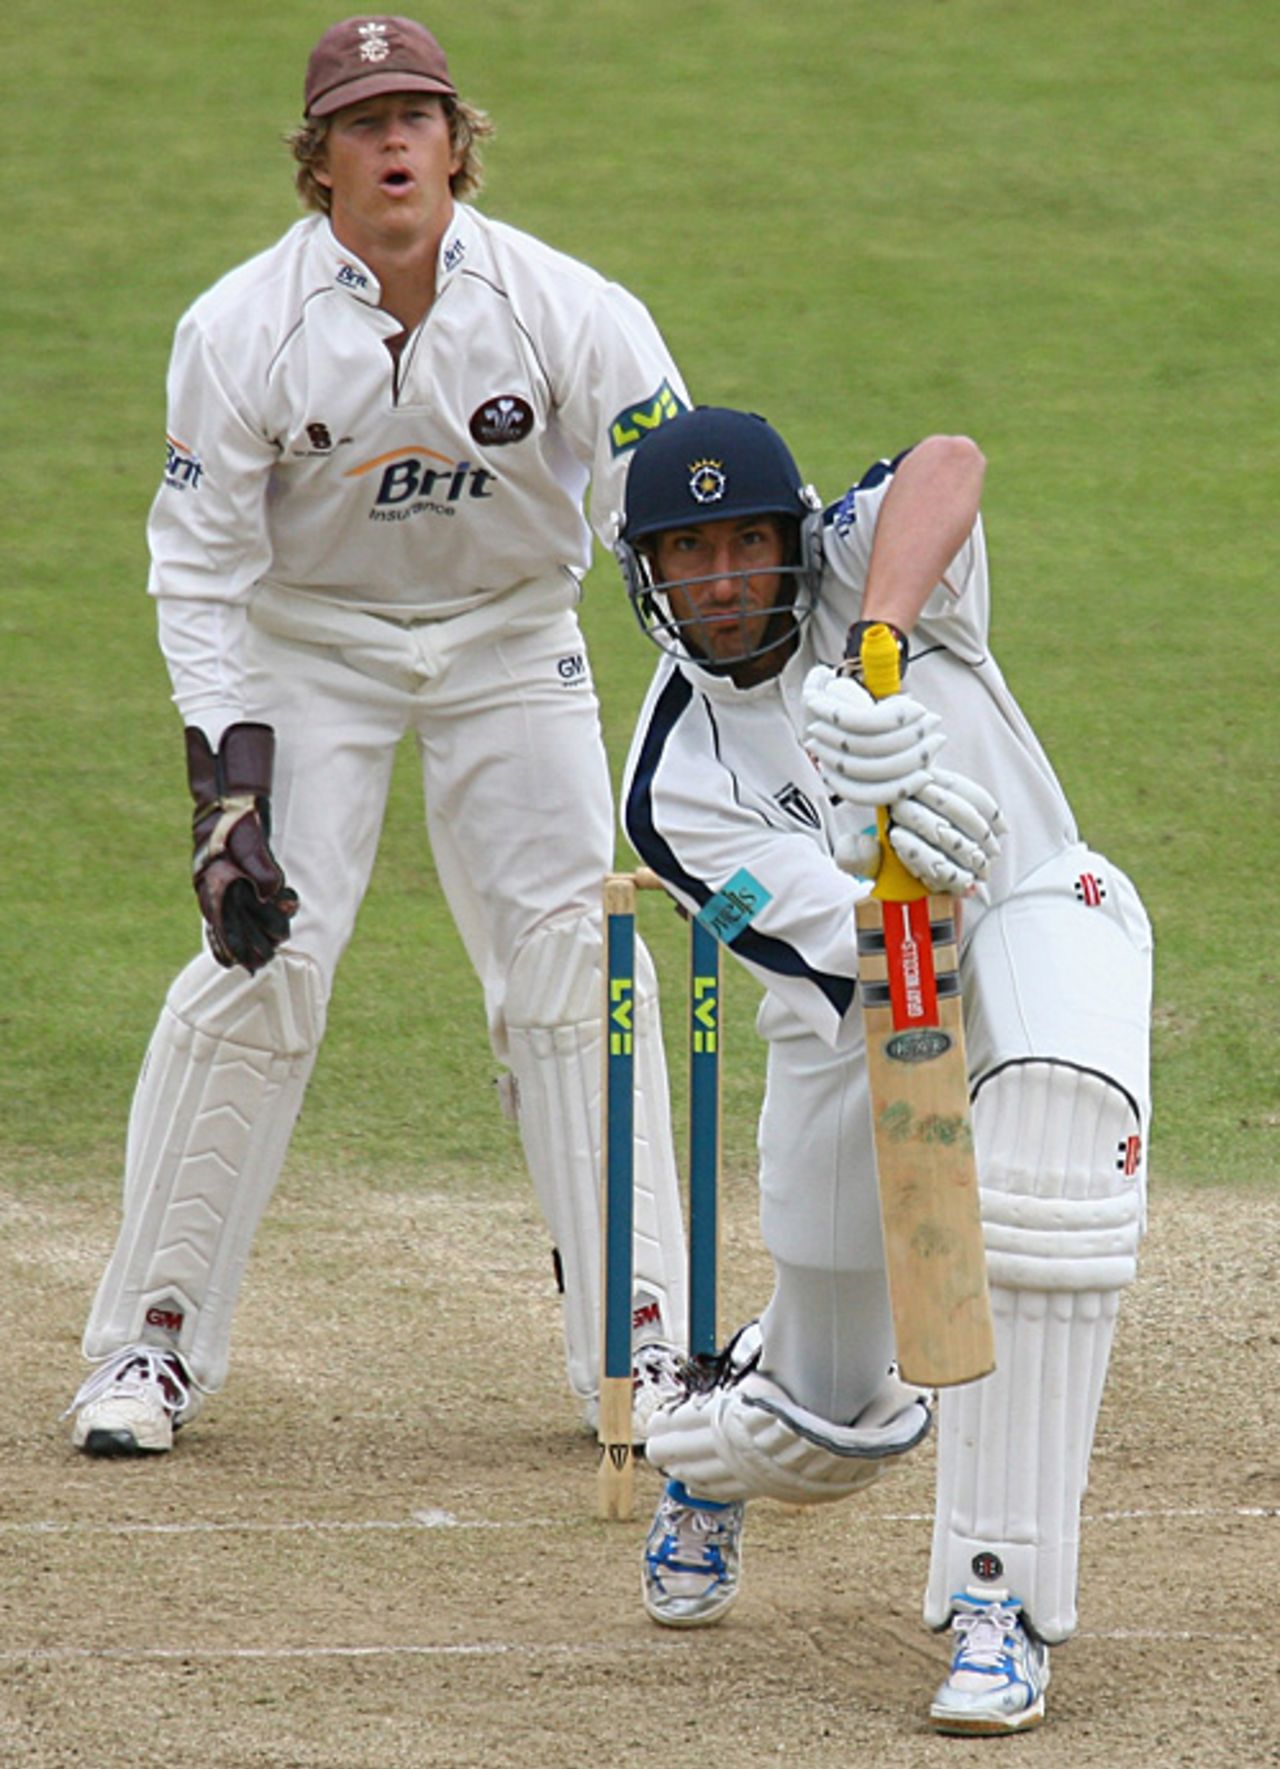 Nic Pothas punches one back to the bowler, Hampshire v Surrey, Southampton, September 1, 2007